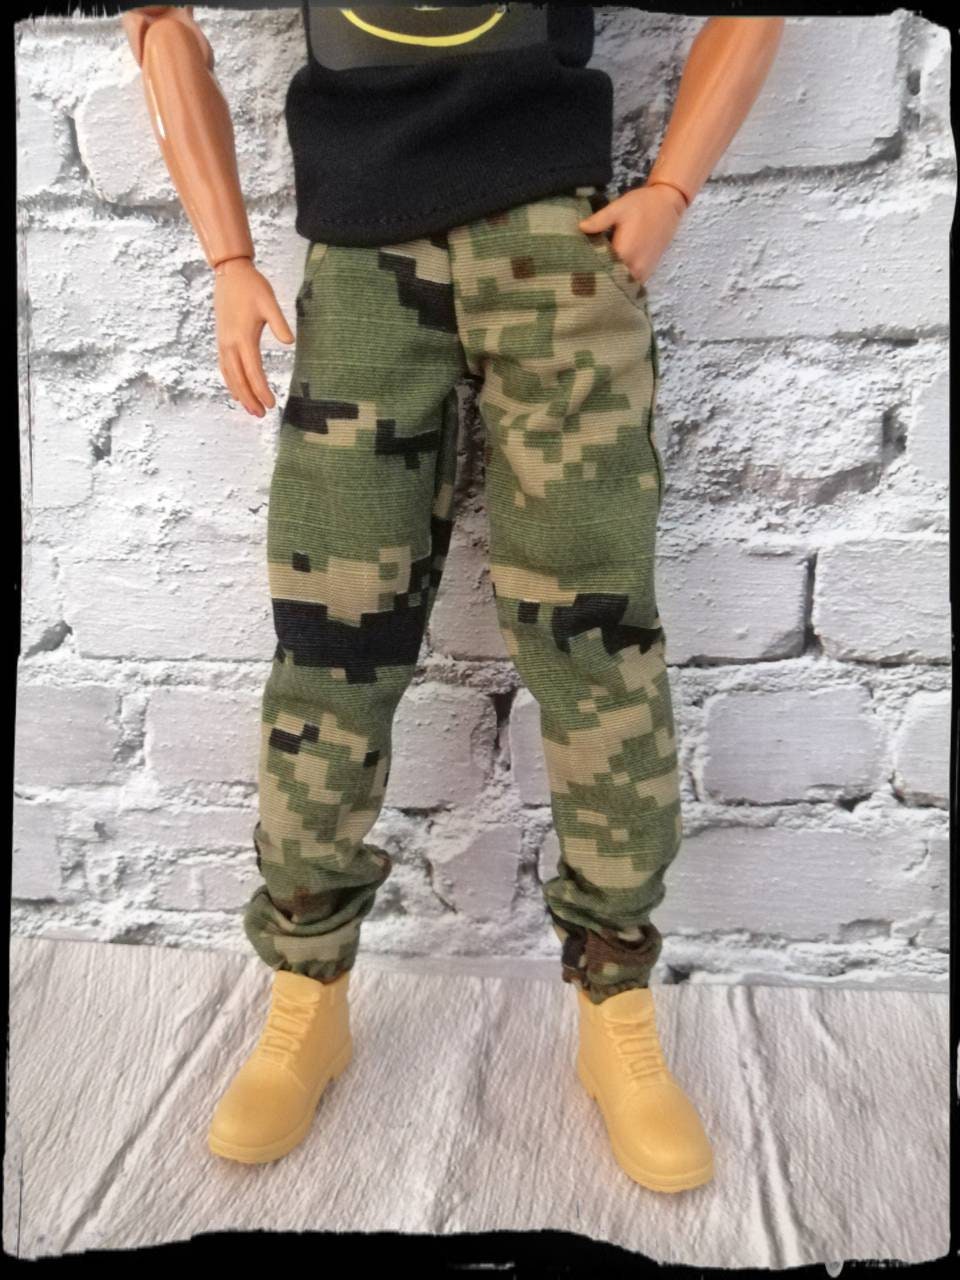 1:6th Black and white striped camouflage pants model For 12" Male figure Dolls 